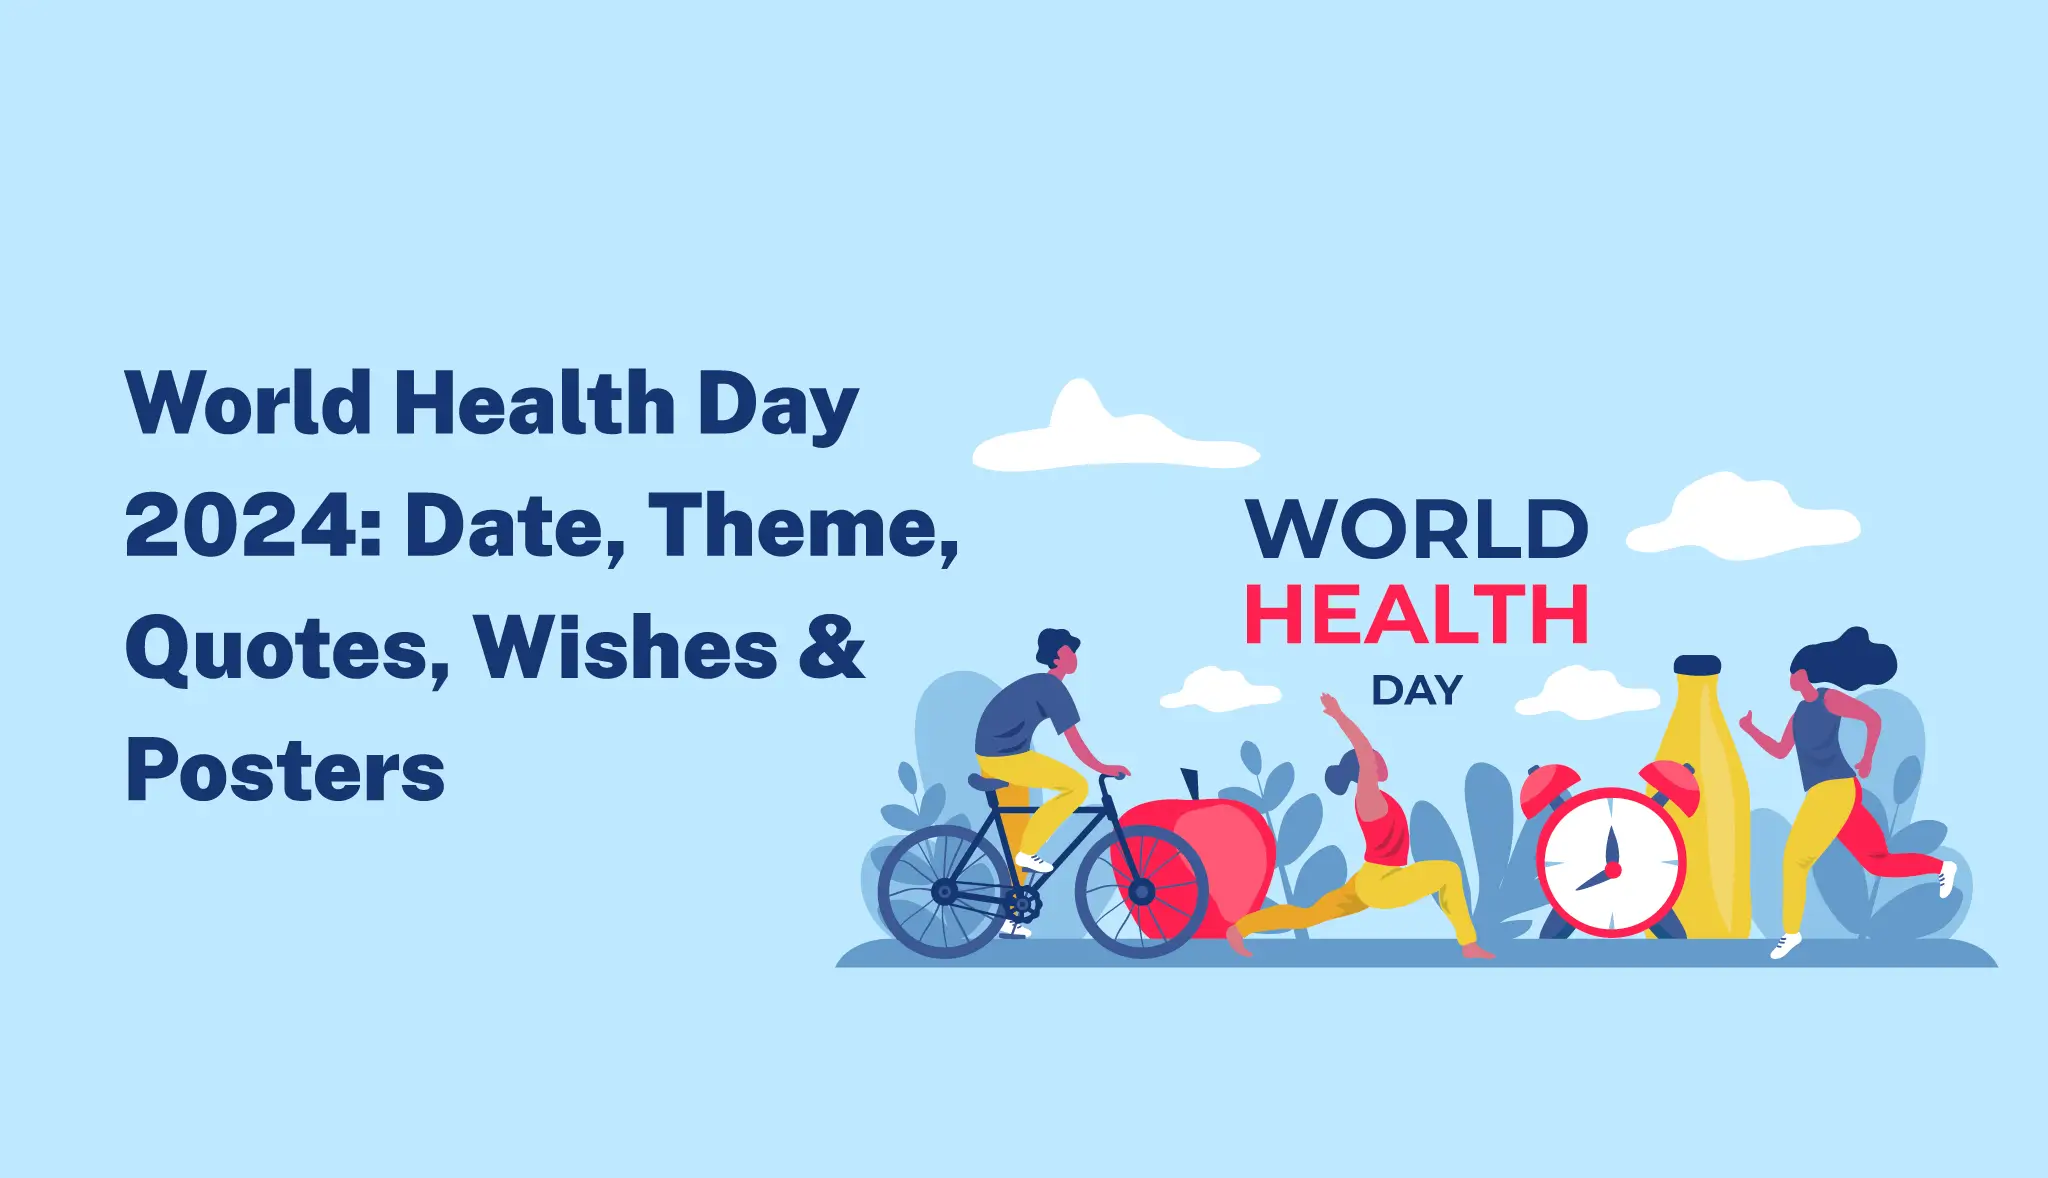 World Health Day 2024: Date, Theme, Quotes, Wishes & Posters - Postive